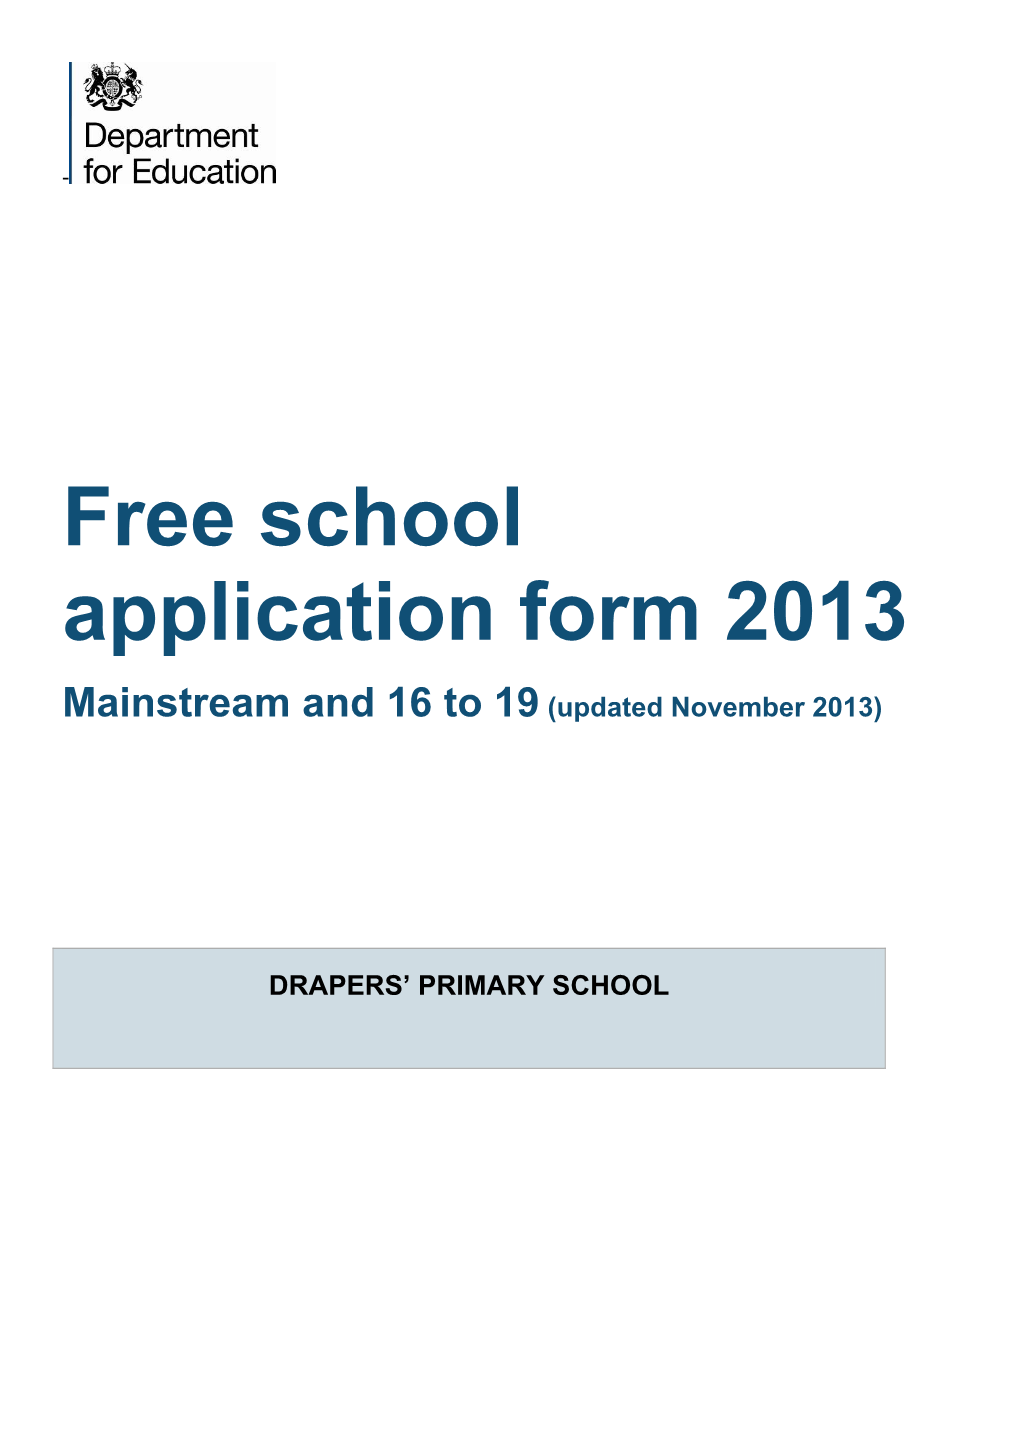 Free School Application Form 2013 Mainstream and 16 to 19 (Updated November 2013)